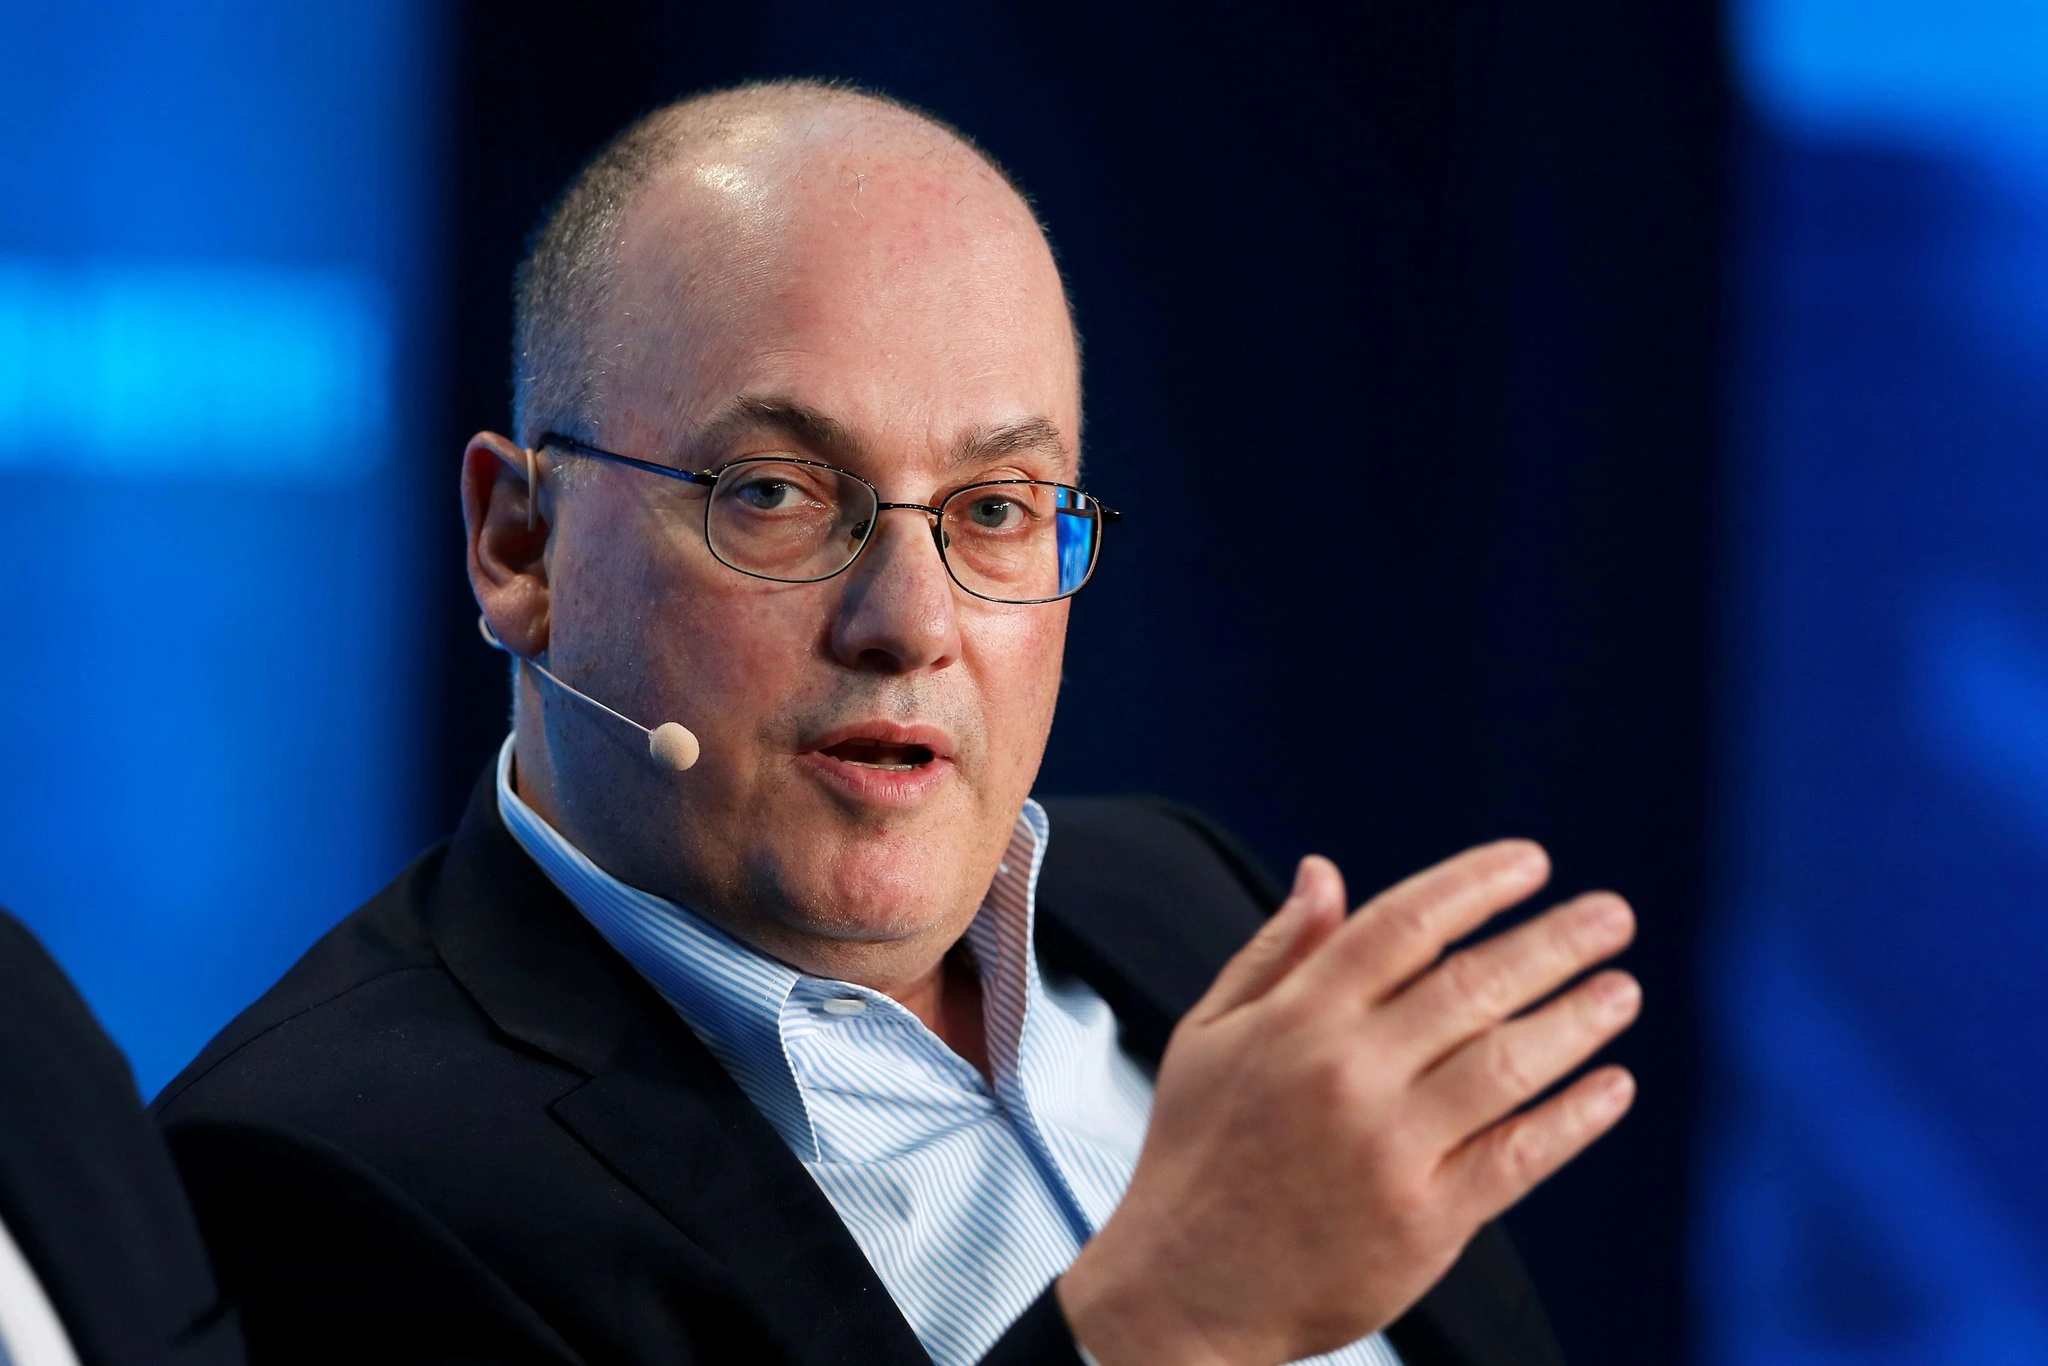 Interesting facts about Steven Cohen
source https://www.nytimes.com/2017/12/25/business/steven-cohen-sac-hedge-funds.html